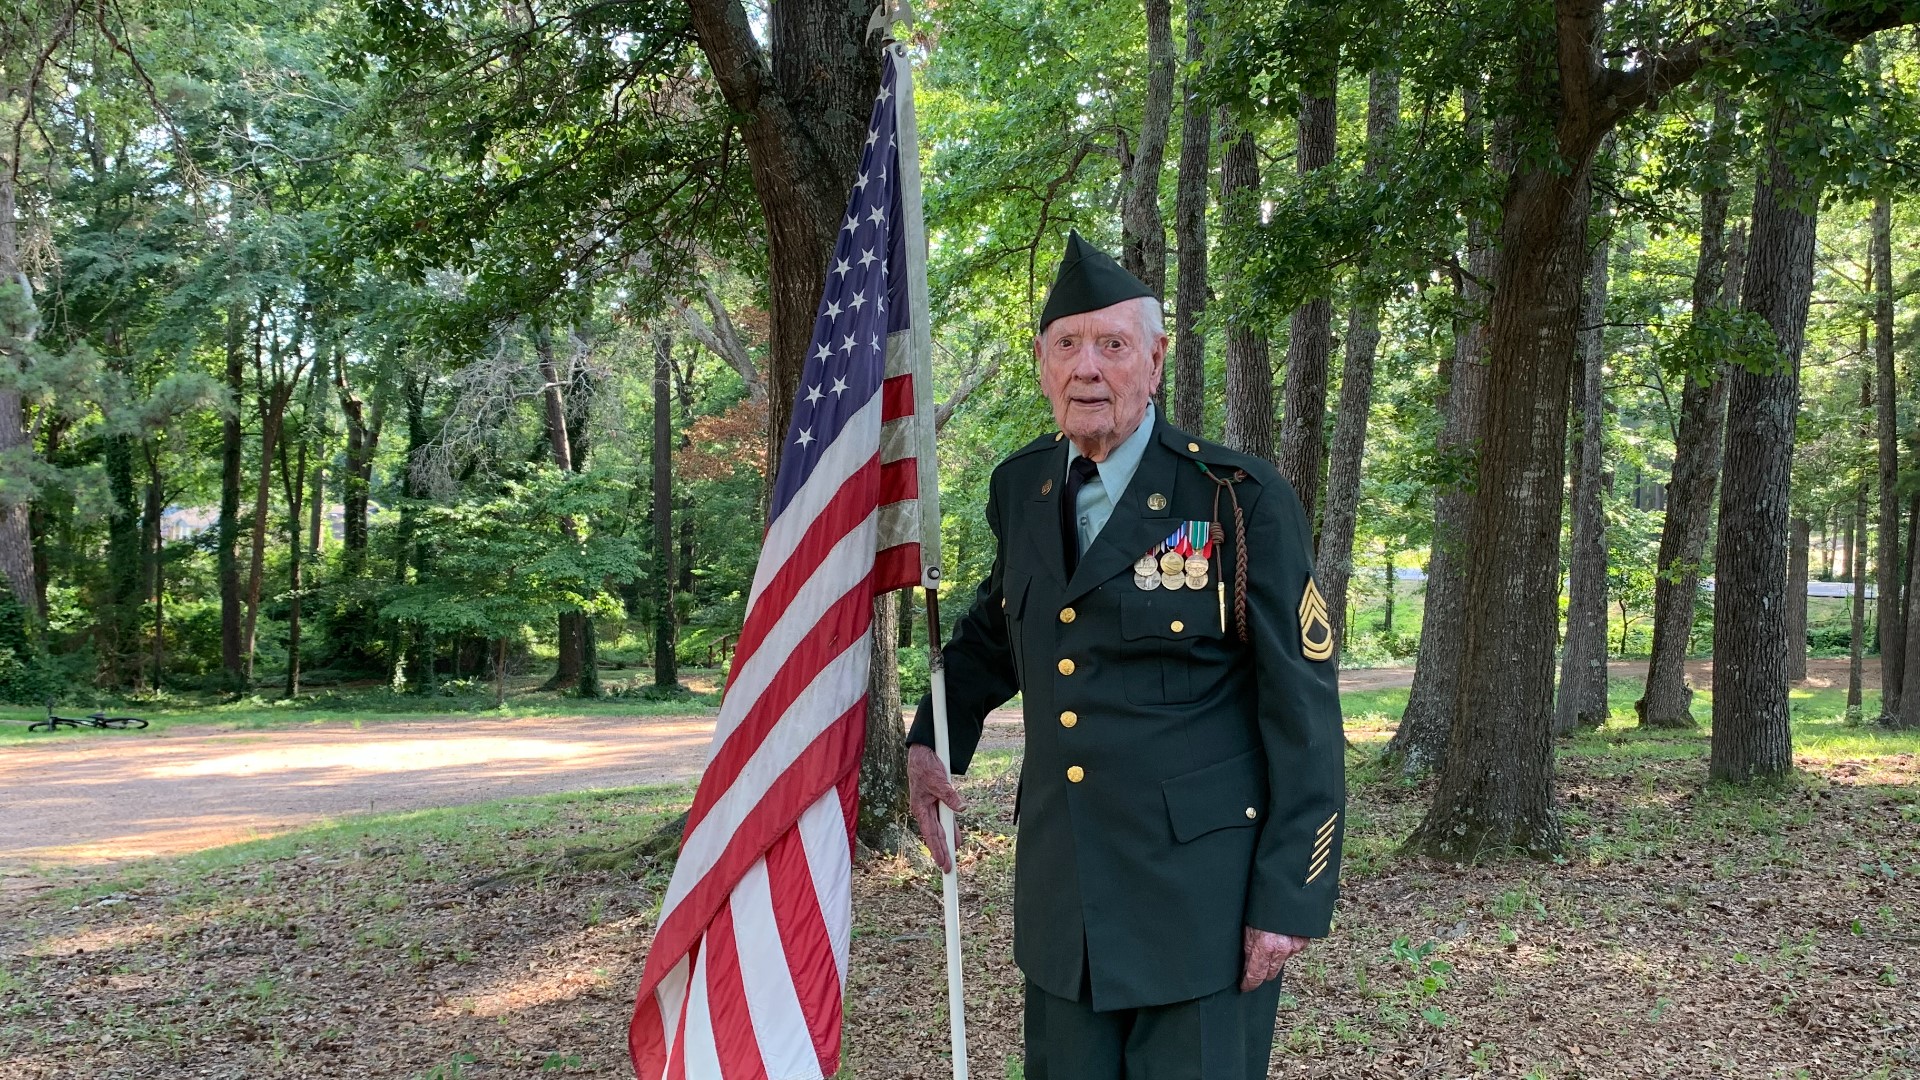 Dr. Jack Hetzel, 100, says "if I was called to active duty I'd say 'Yes sir. I'll be there.'"